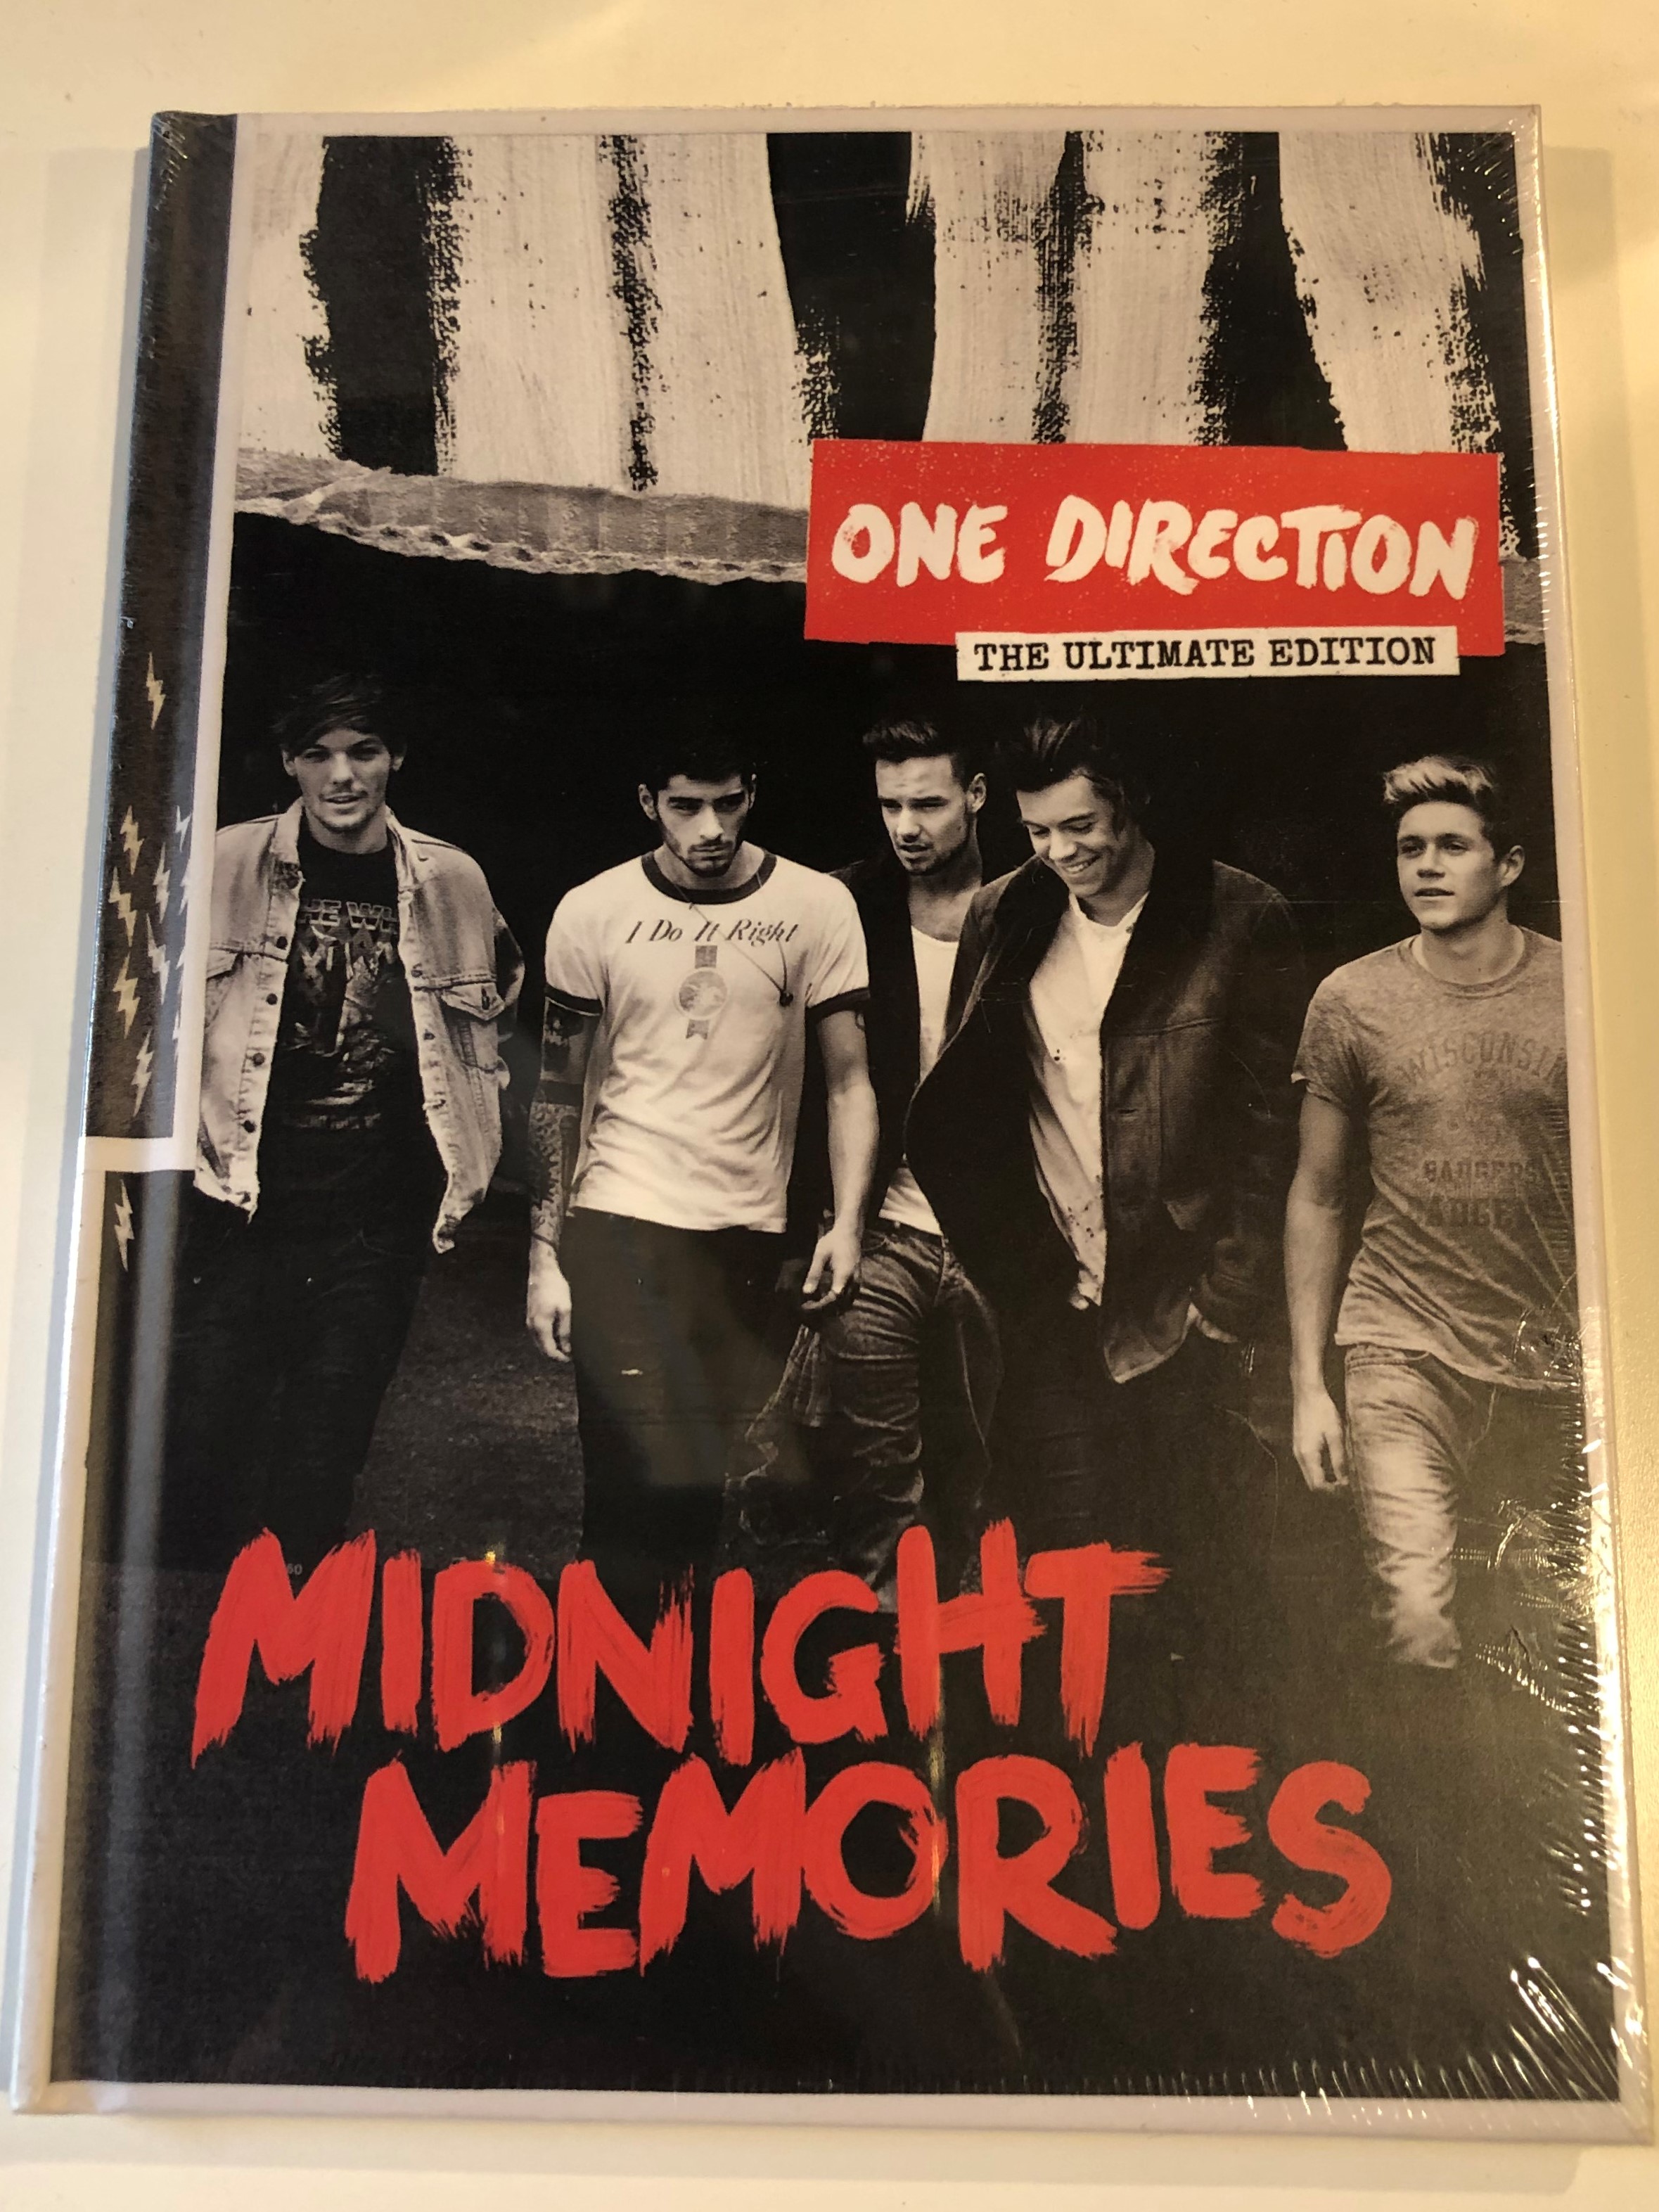 one-direction-the-ultimate-edition-midnight-memories-simco-limited-audio-cd-2013-88883791692-1-.jpg